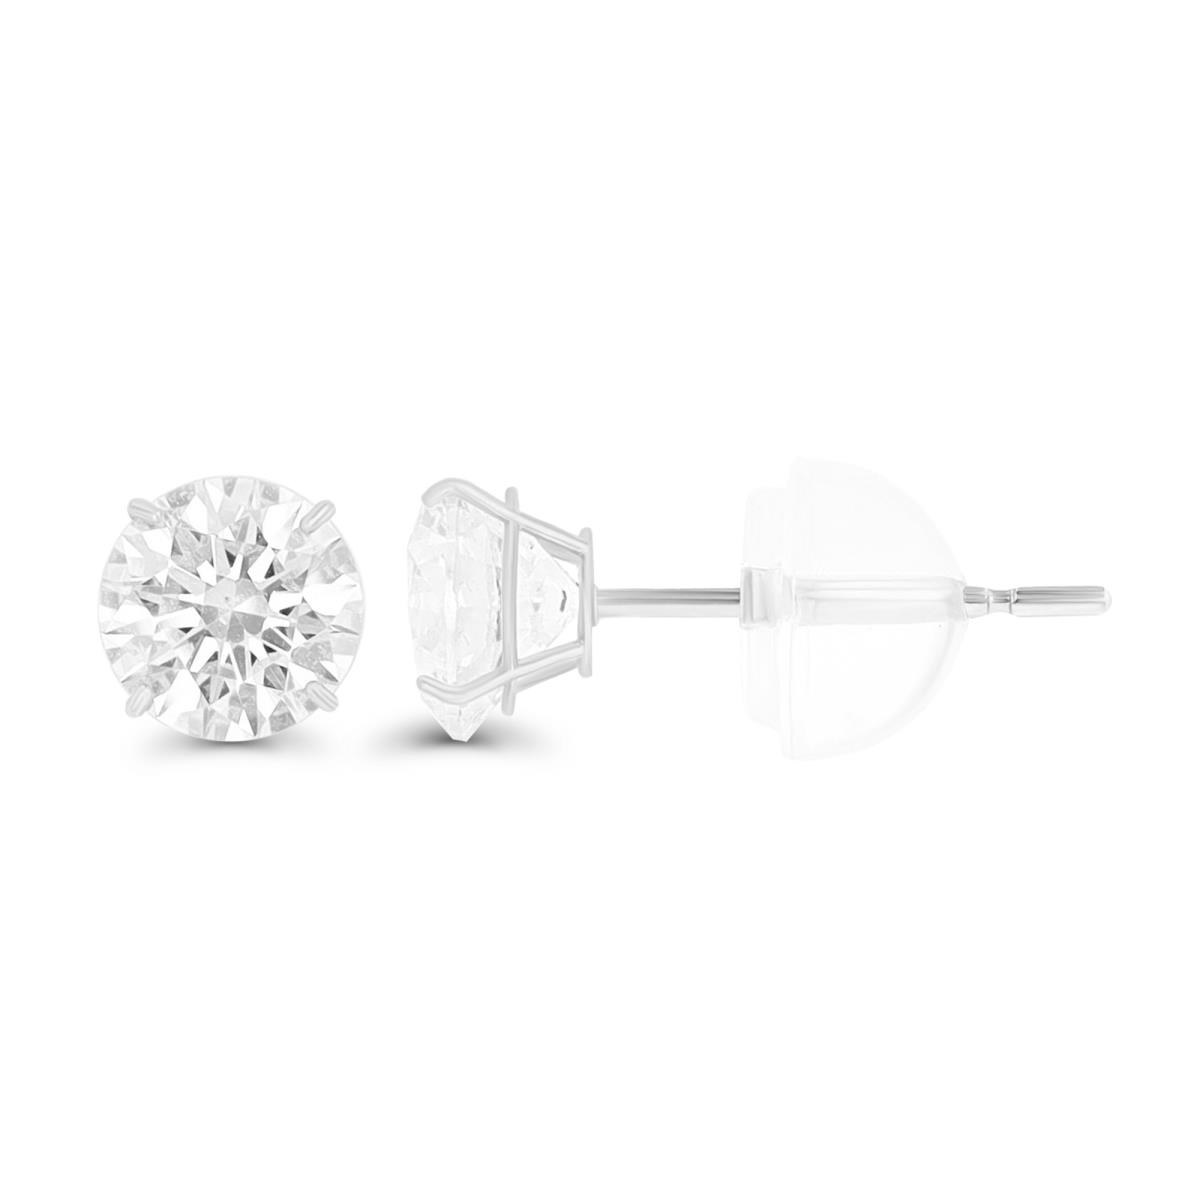 14K White Gold 6mm Rd White Swarovski Zirconia 4-Prong Cast Basket Solitaire Earring & Silicone Bubble Back